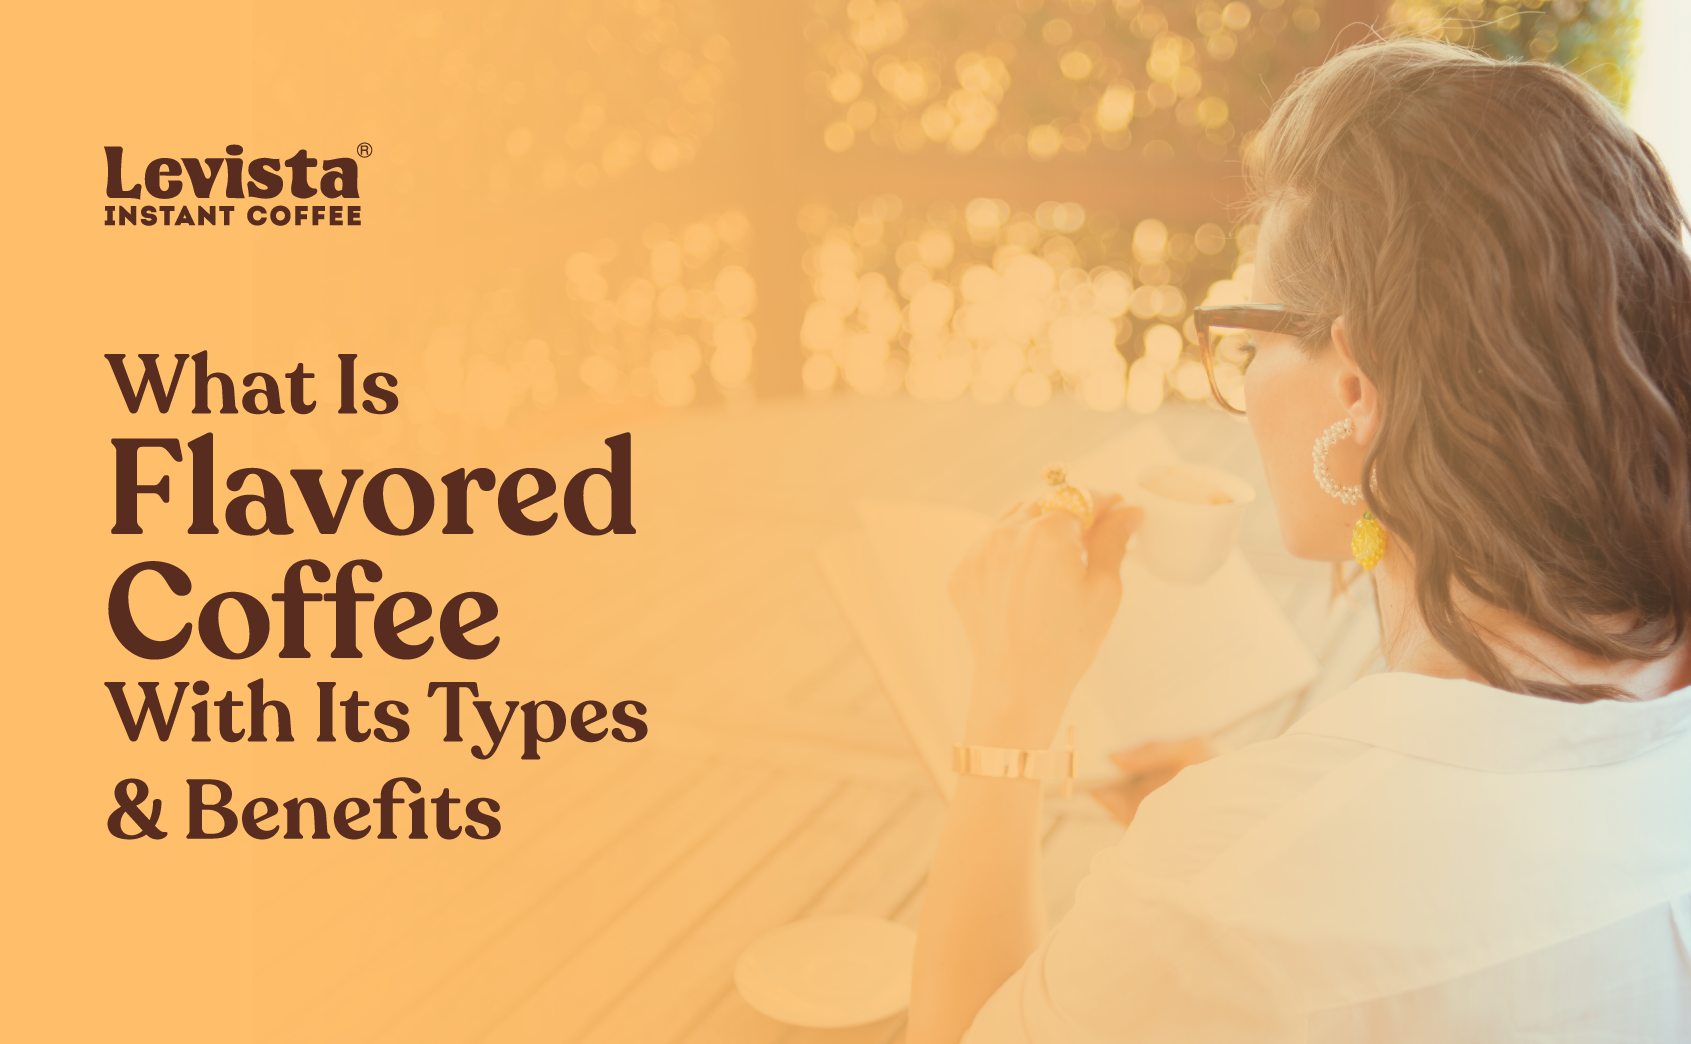 What Is Flavored Coffee with its Types & Benefits